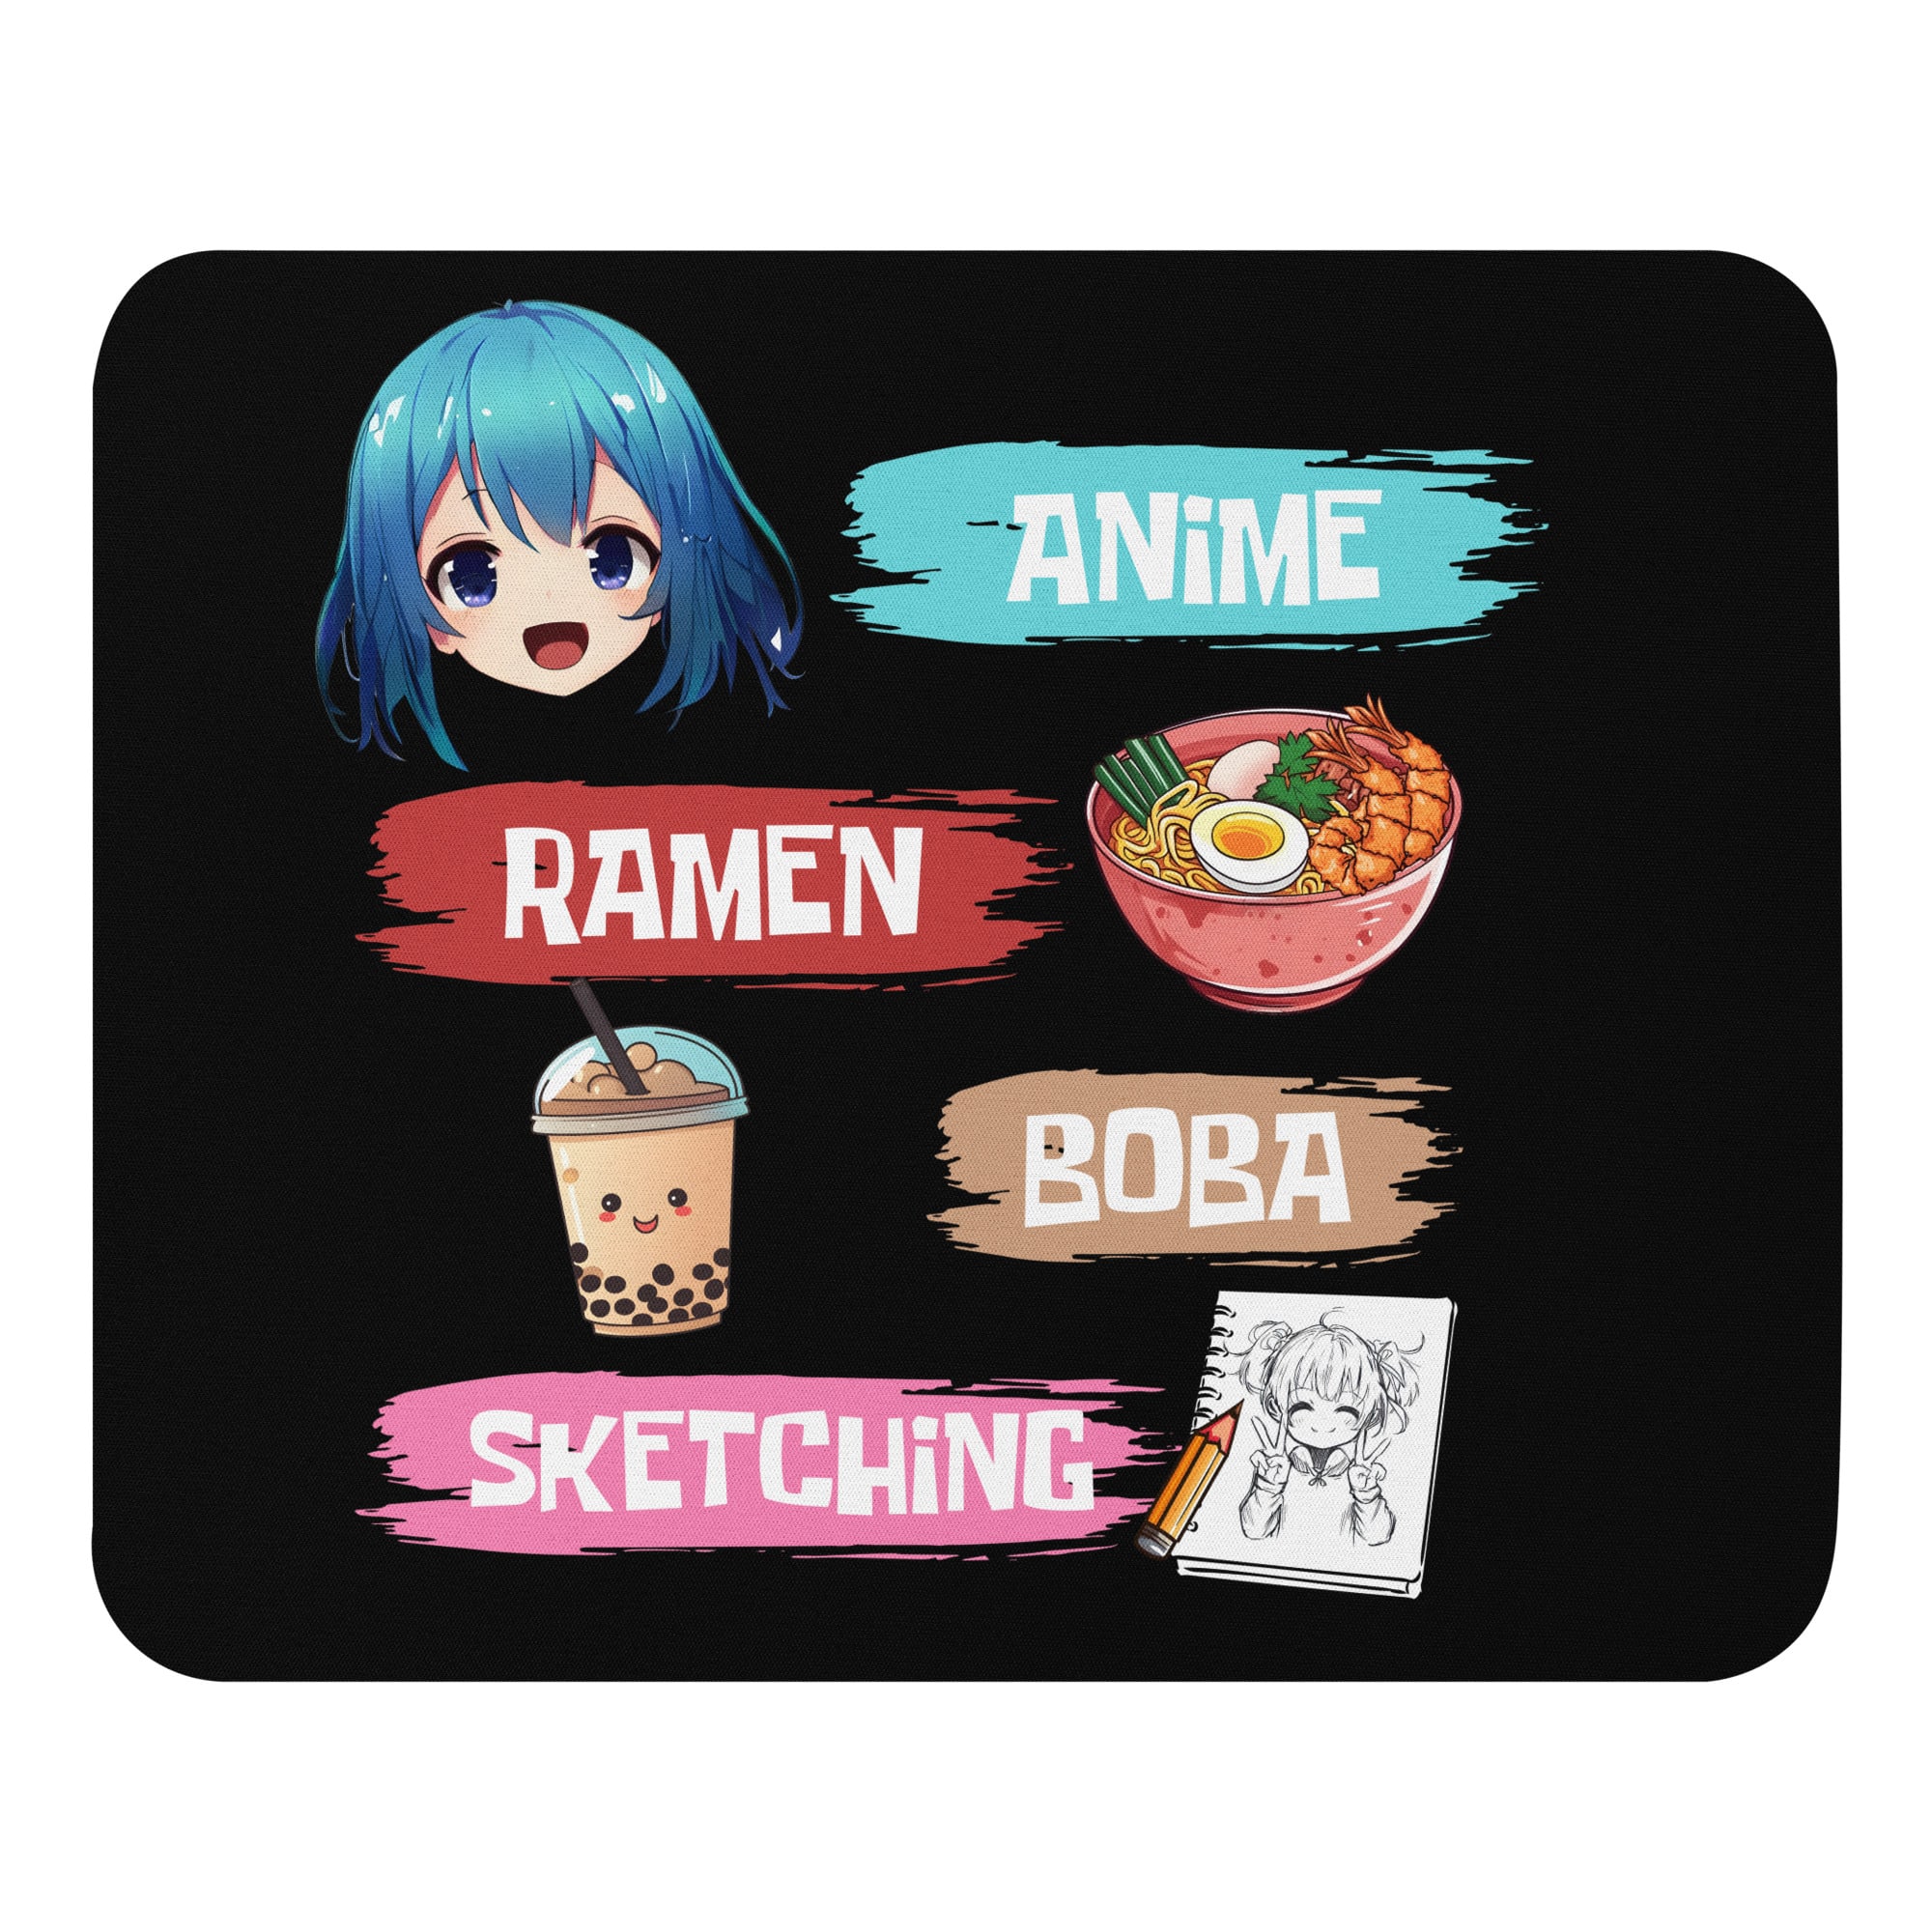 Anime Ramen Boba Sketching Mouse Pad Anime mouse pad Ramen mouse pad Boba mouse pad Sketching mouse pad Anime merchandise Cute mouse pad Anime-themed mouse pad Unique mouse pad designs Mouse pad for artists Gaming mouse pad Video game store Gaming merchandise Gaming accessories shop Online gaming store Video game shop near me Gaming console store PC gaming store Gaming gear shop Retro gaming shop Board game shop Anime merchandise Anime store online Japanese anime shop Anime figurines Manga shop Anime DVDs Anime accessories Anime apparel Anime collectibles Anime gifts